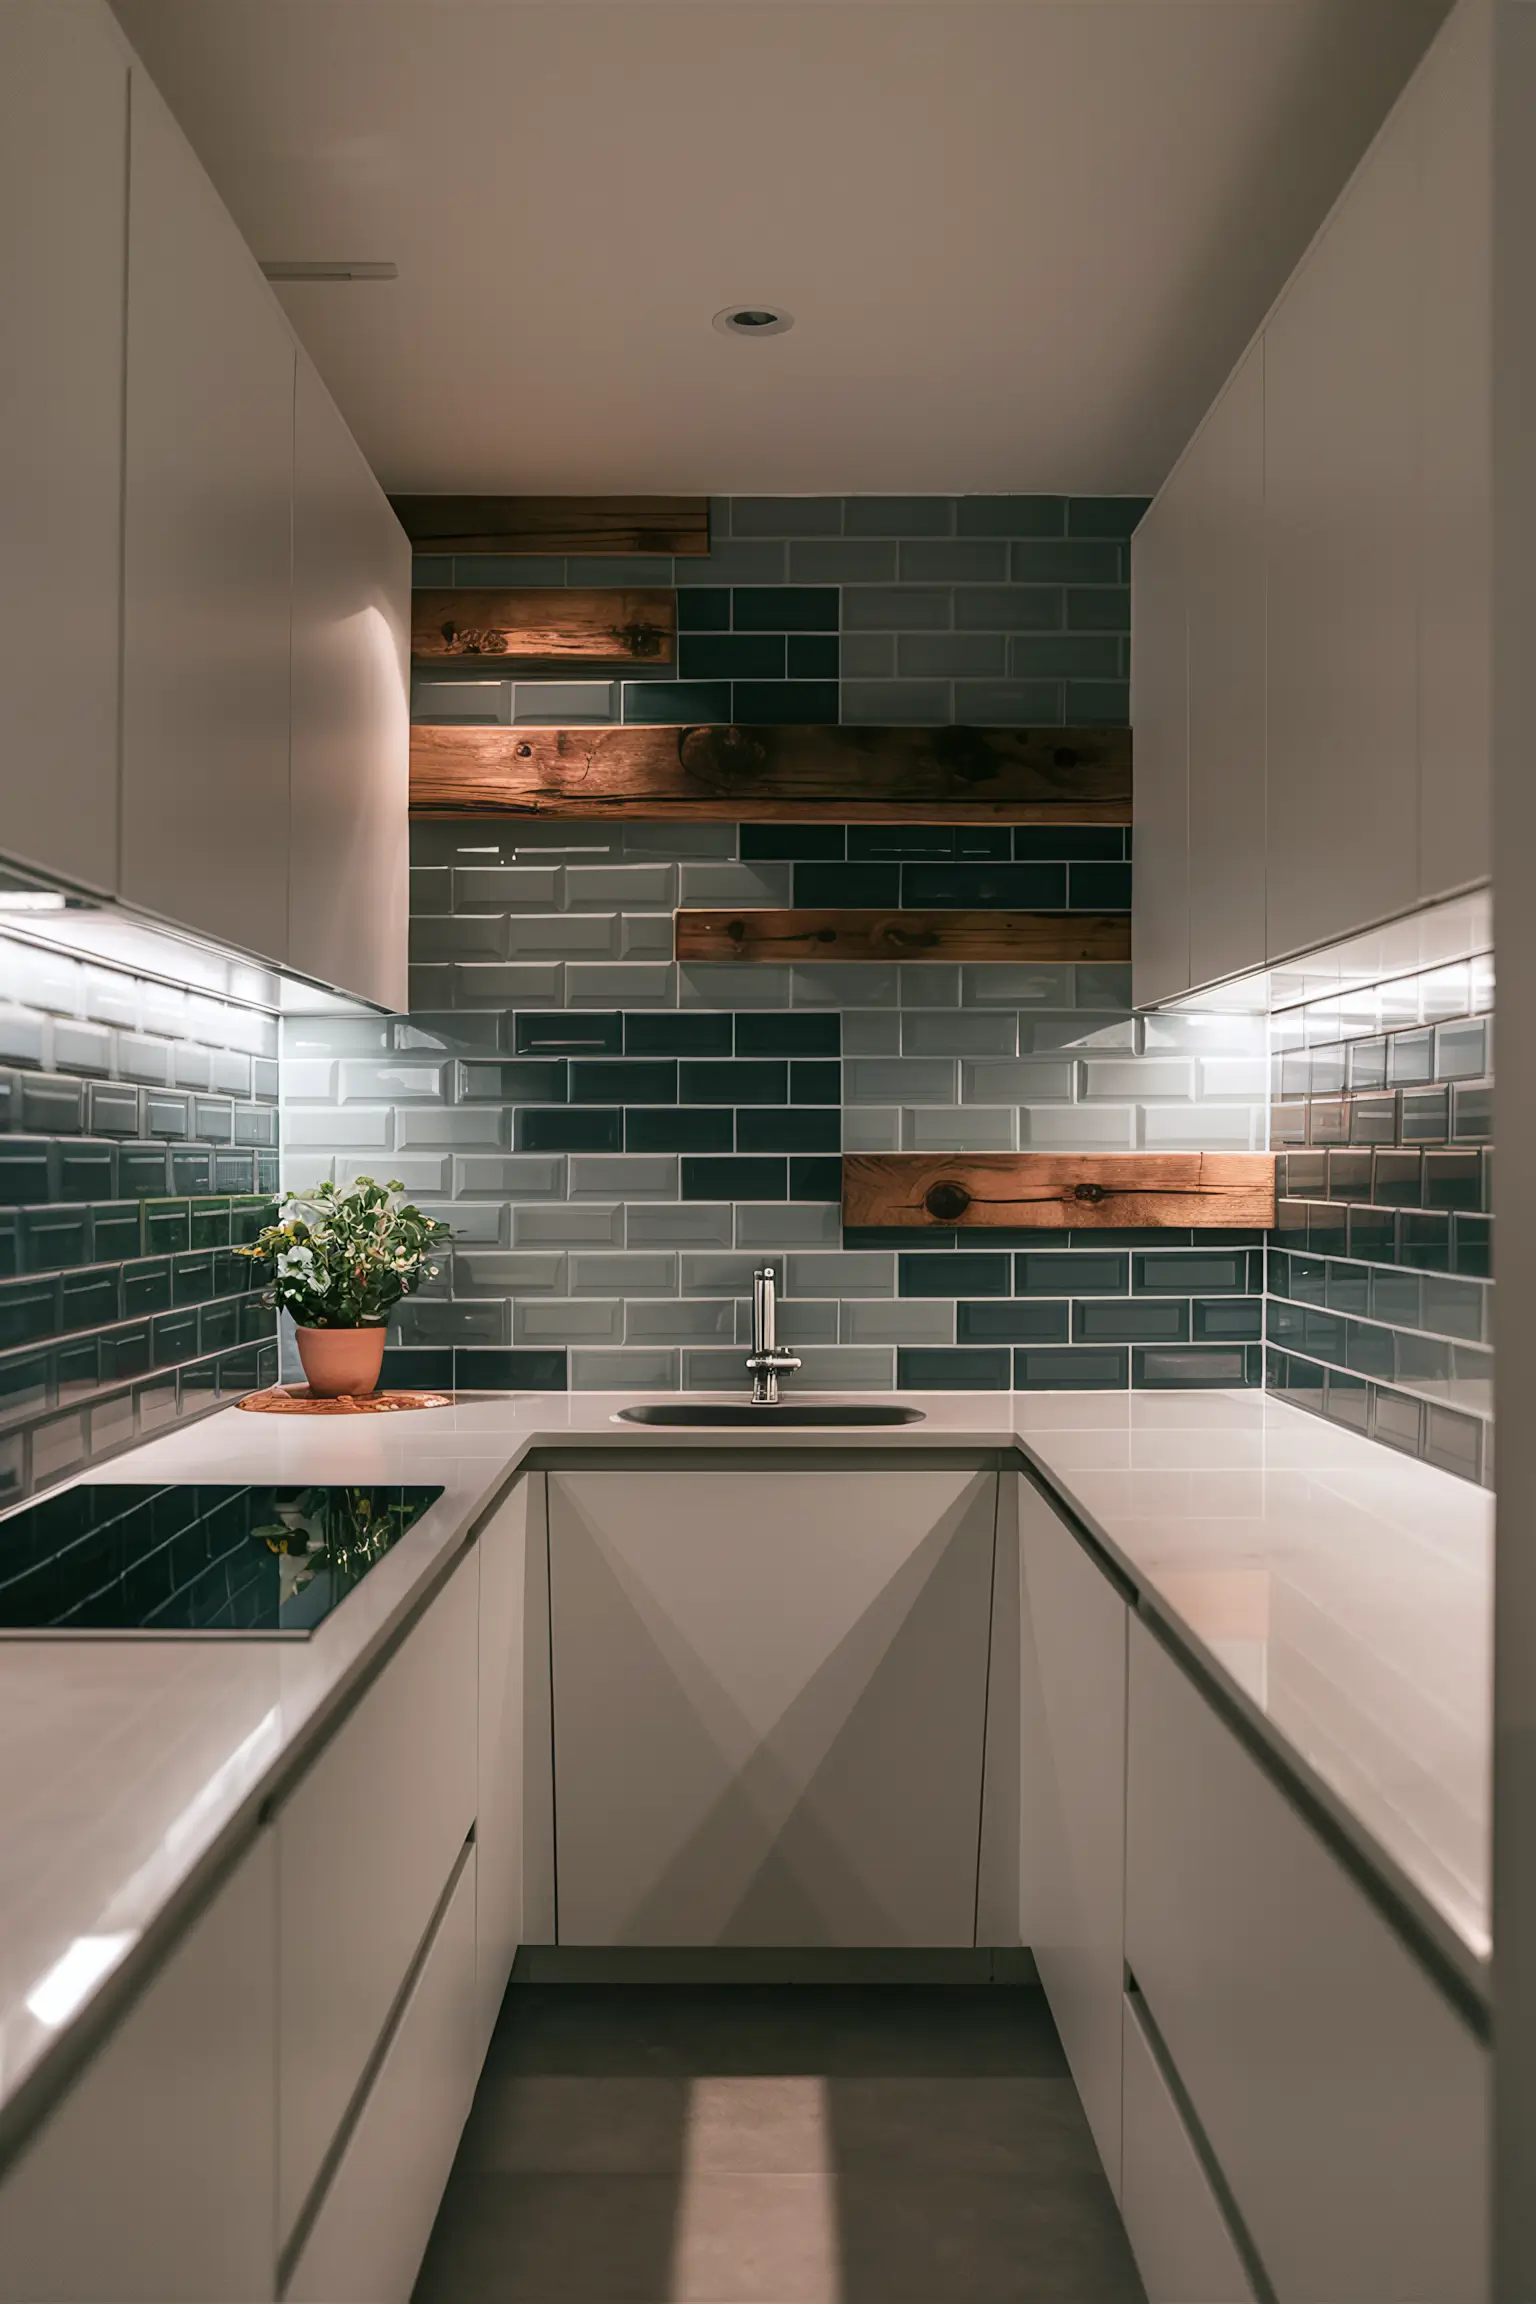 Minimalistic farmhouse kitchen with subway tile backsplash and rustic accents.